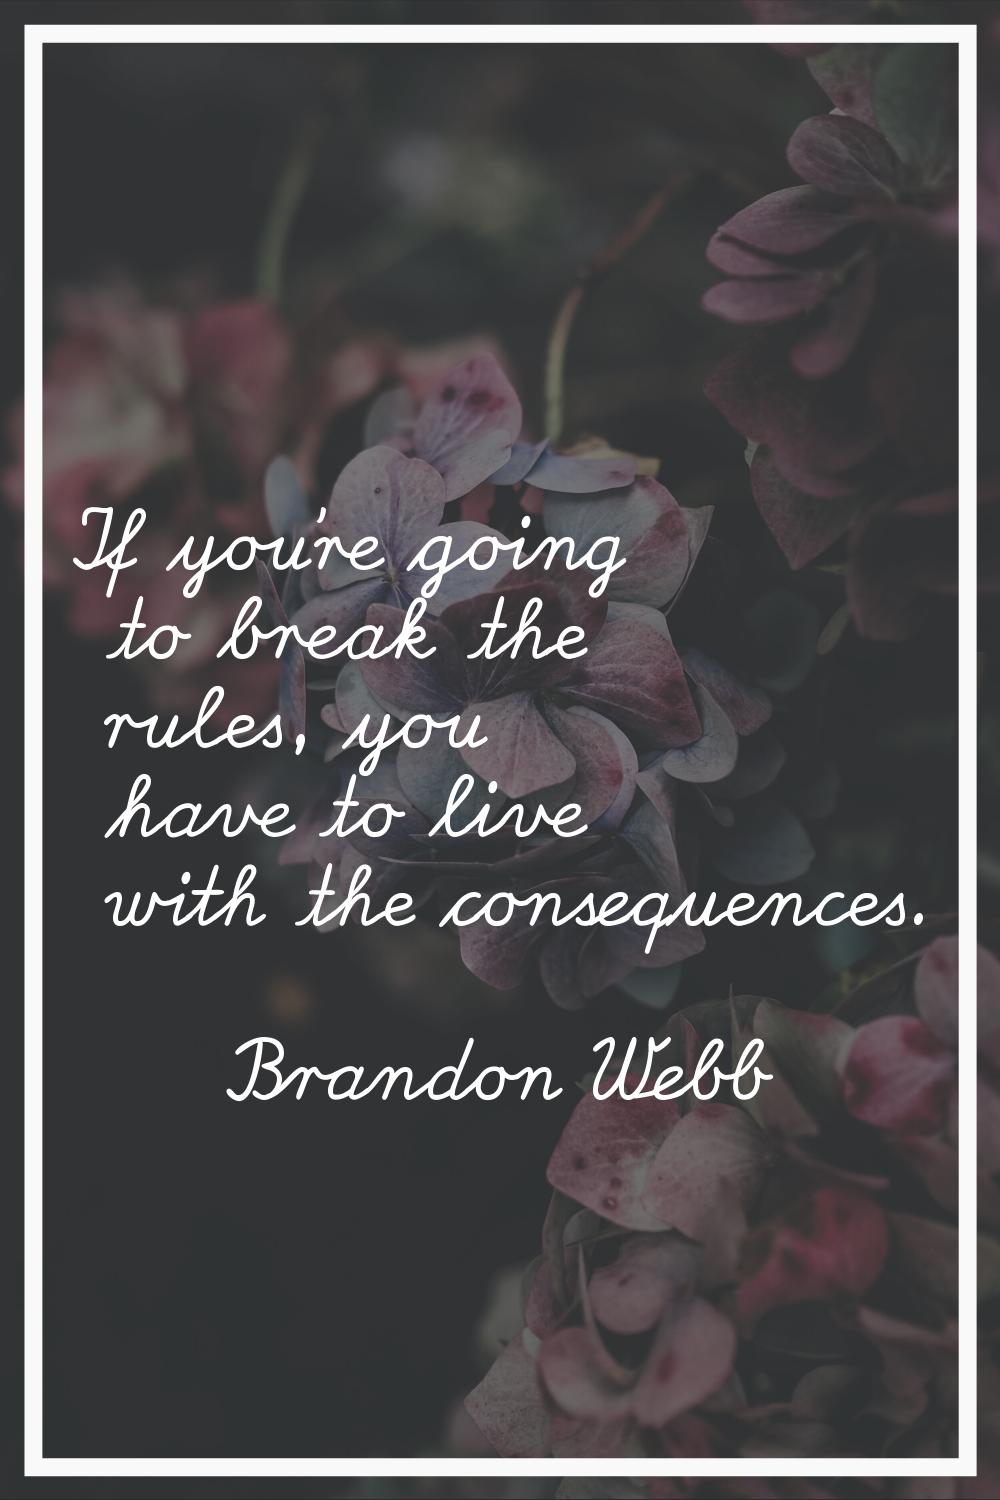 If you're going to break the rules, you have to live with the consequences.